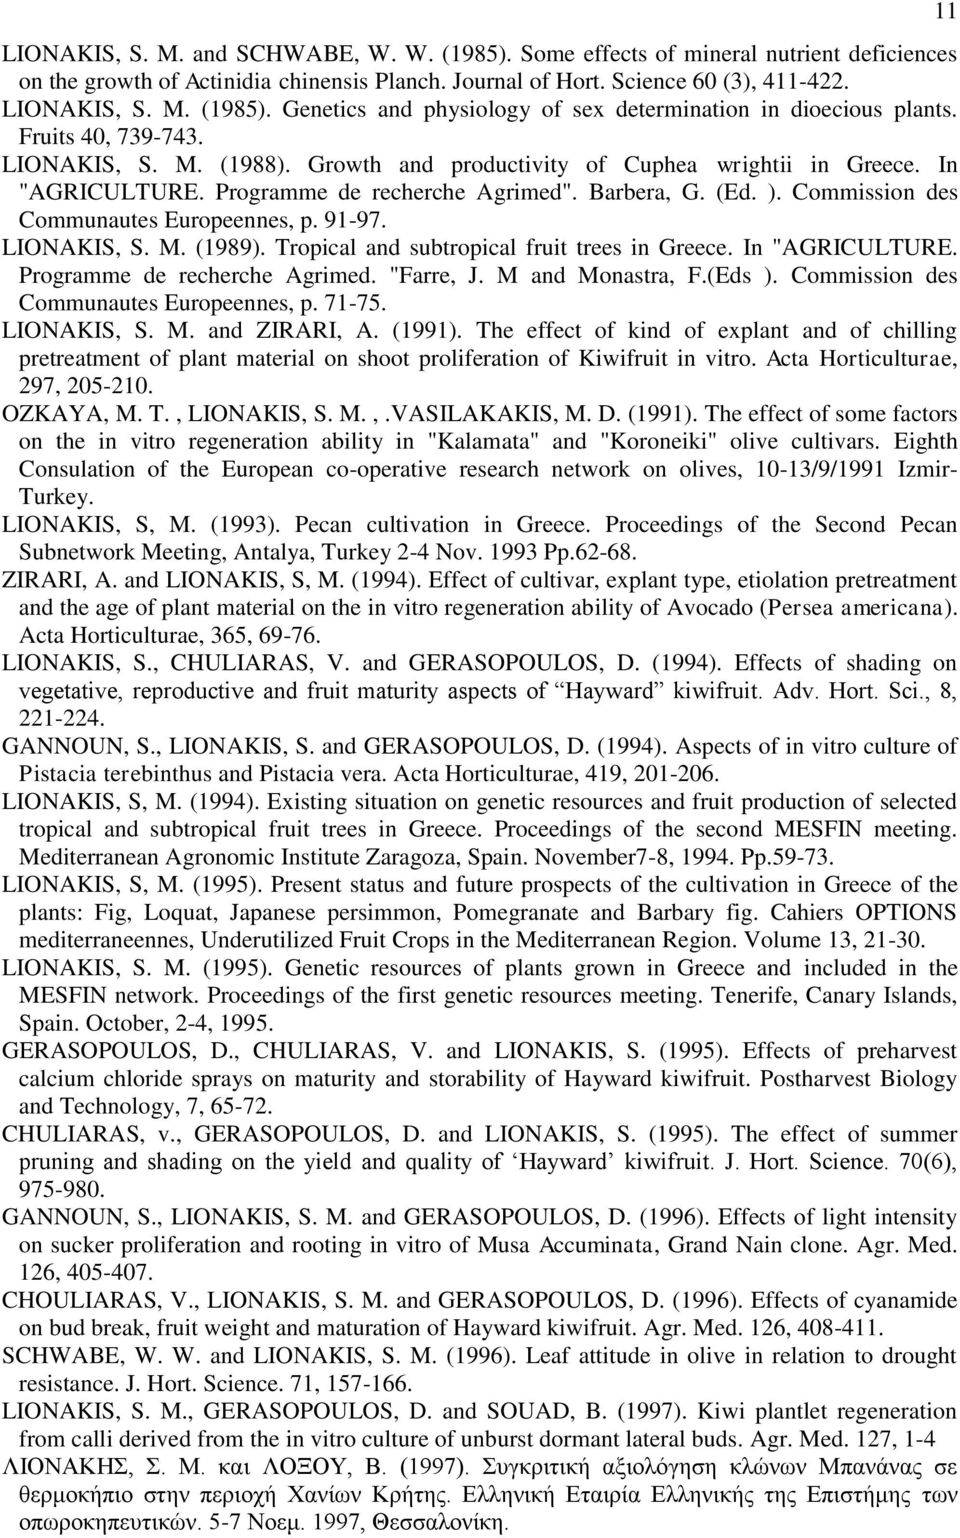 Commission des Communautes Europeennes, p. 91-97. LIONAKIS, S. M. (1989). Tropical and subtropical fruit trees in Greece. In "AGRICULTURE. Programme de recherche Agrimed. "Farre, J. M and Monastra, F.